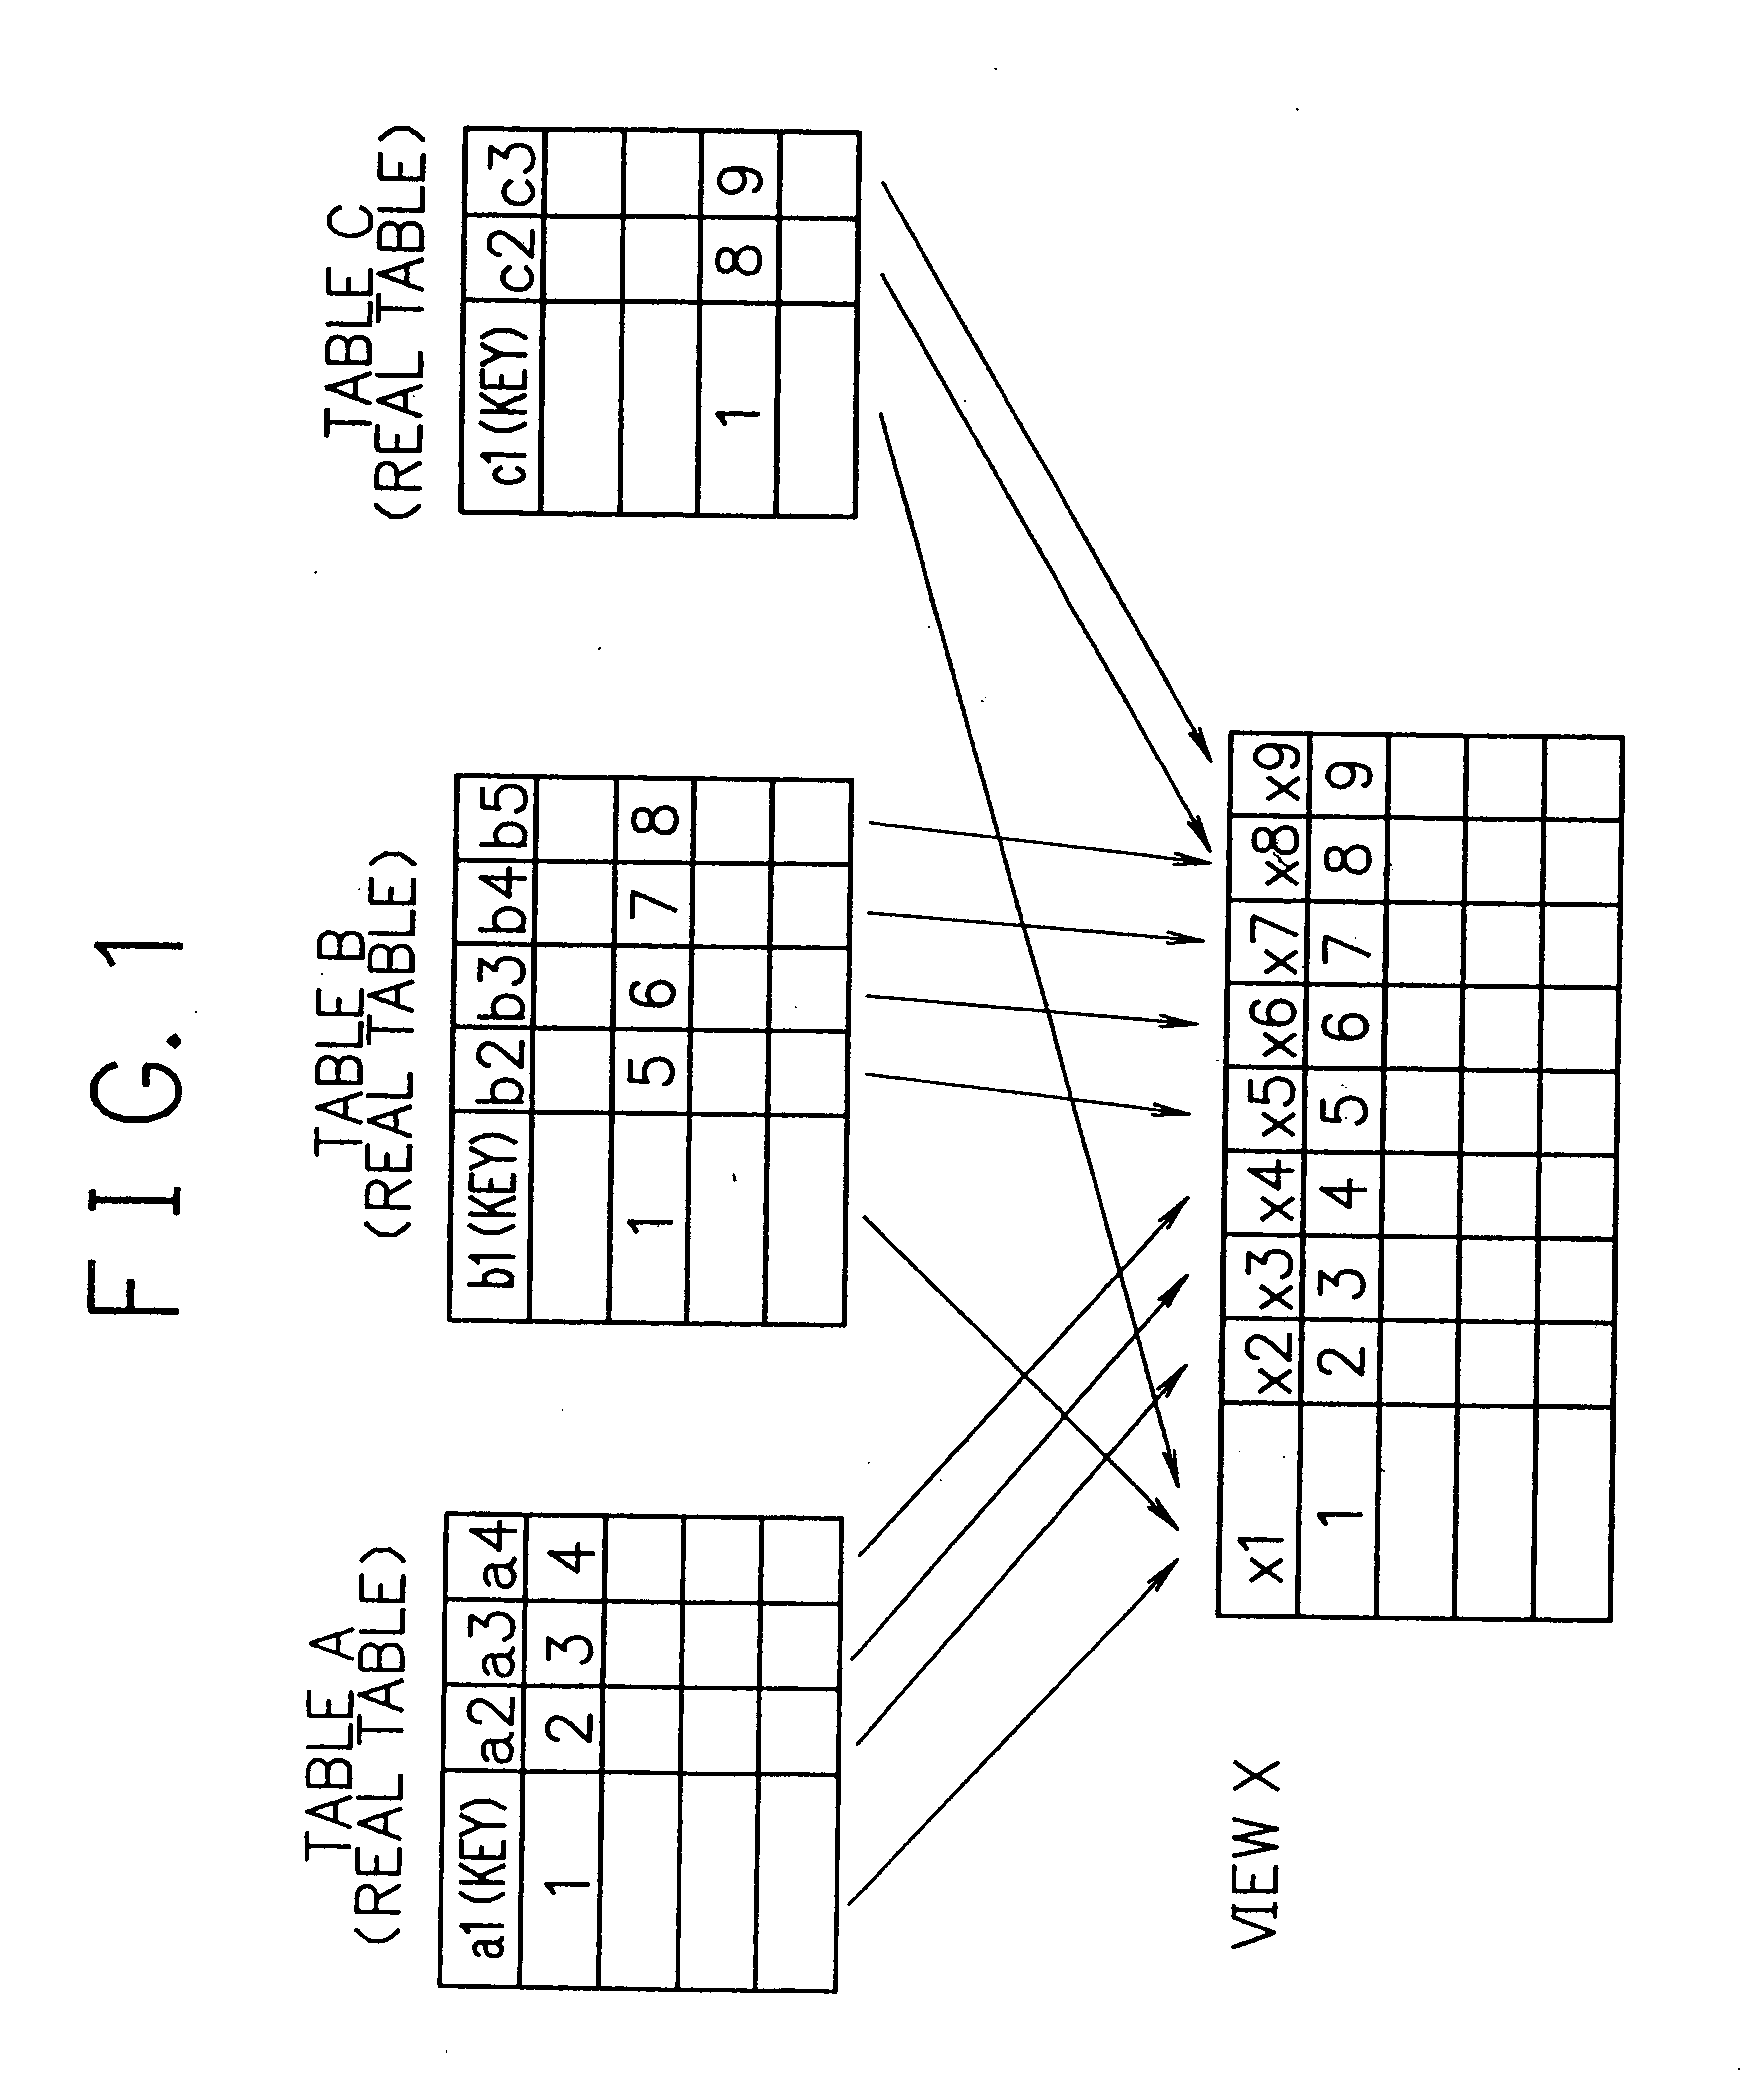 Database system and a method of data retrieval from the system